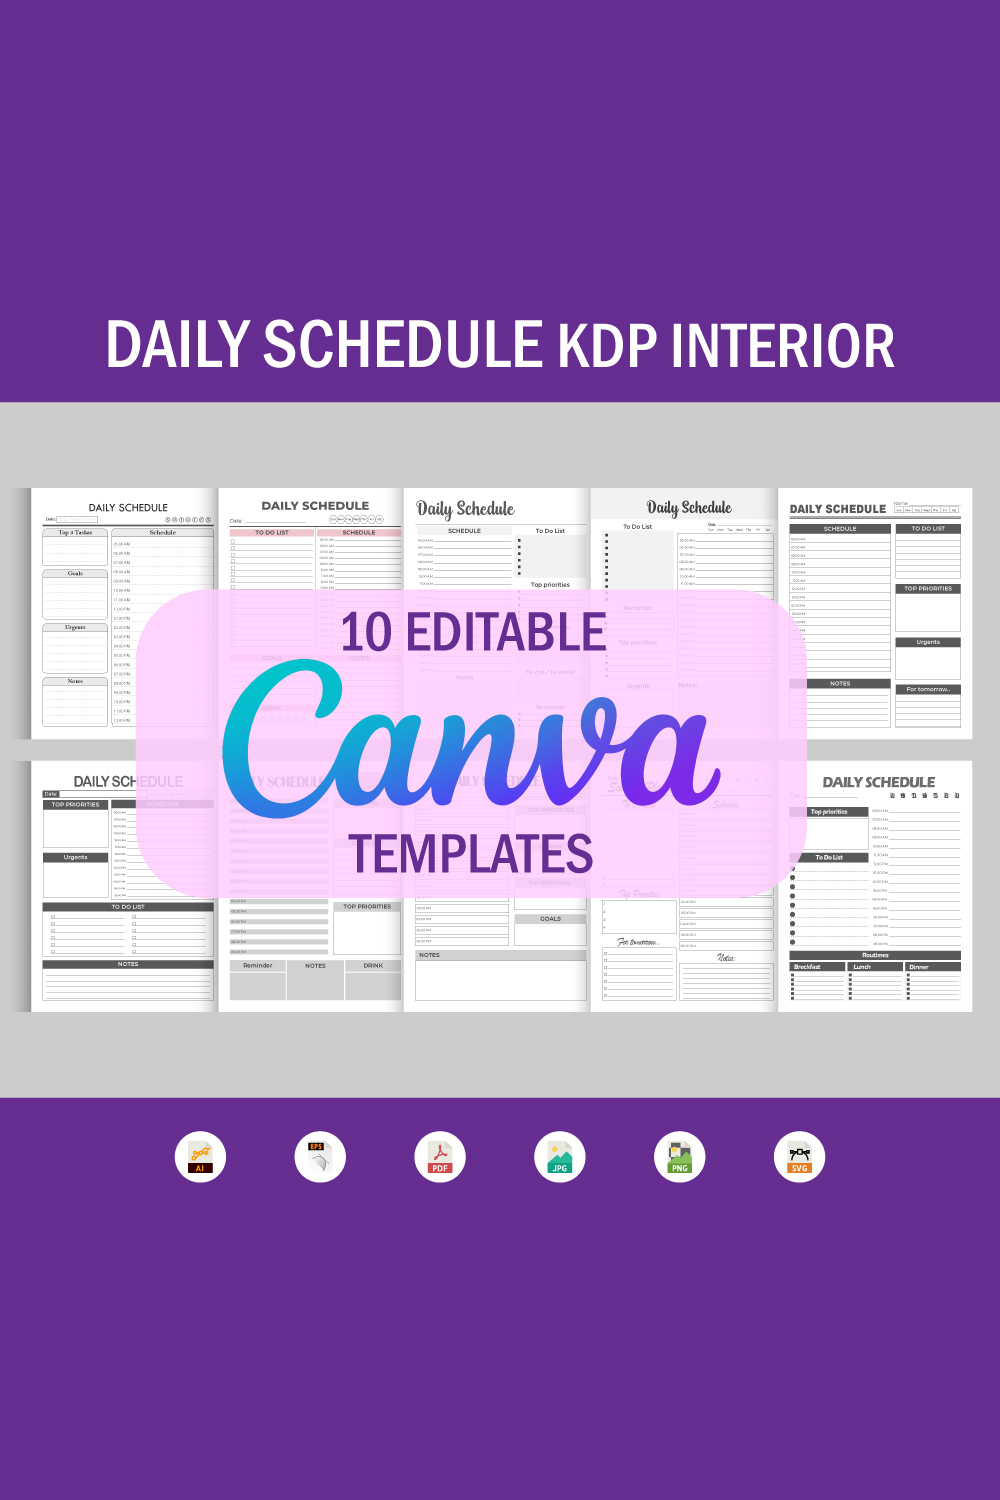 10 Editable Canva Templates Daily Schedule Planner - Pinterest image preview.